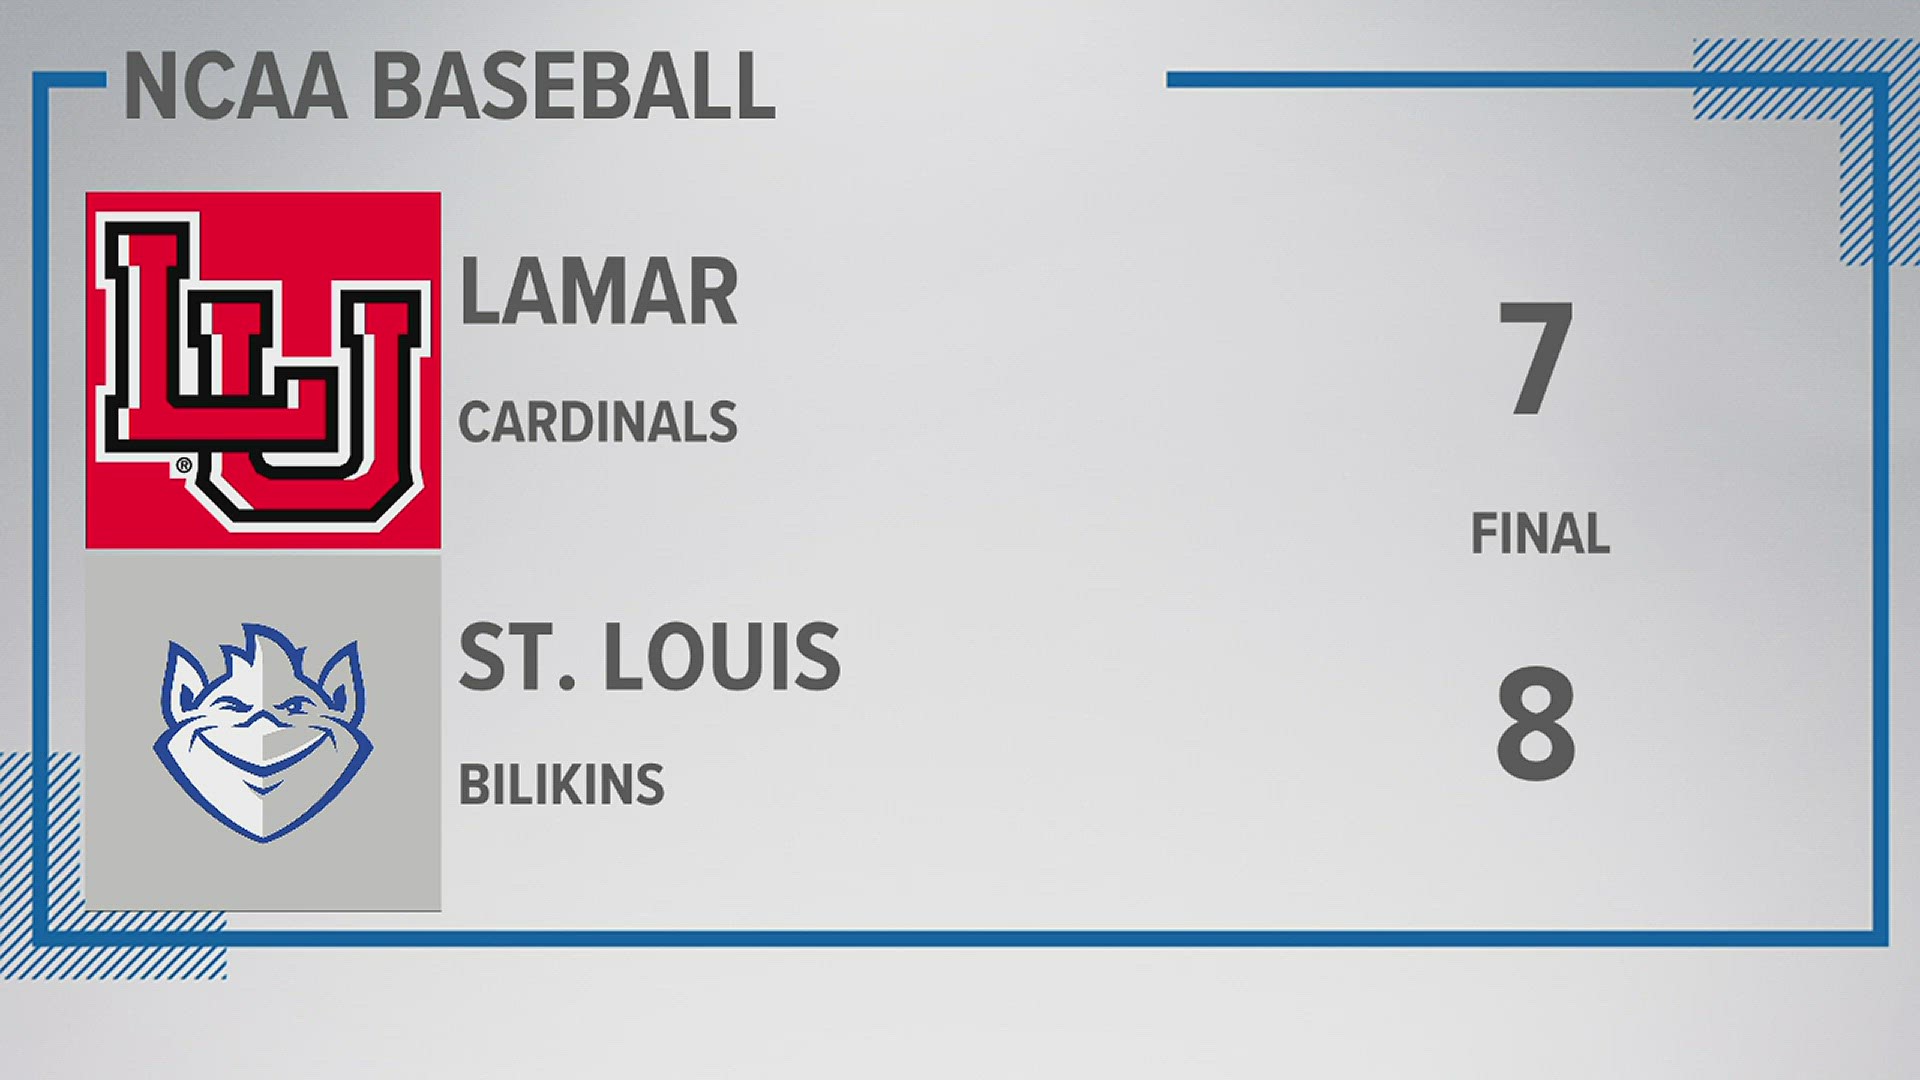 The loss ended Lamar’s small three-game win streak.